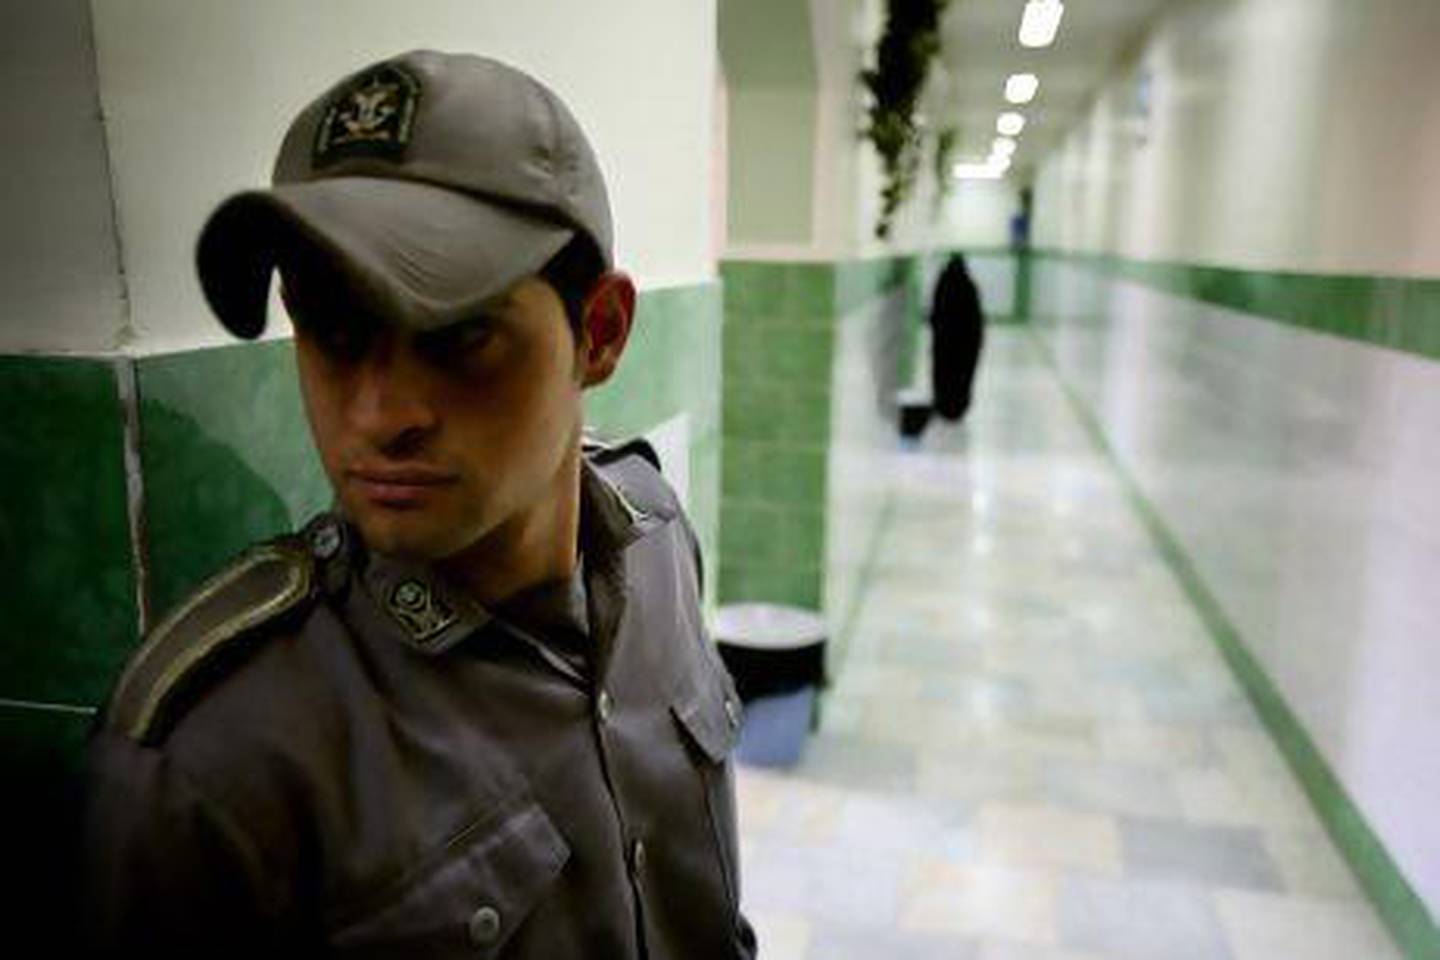 A guard stands along a corridor in Tehran's Evin prison, where detainees are rarely out of site. Reuters